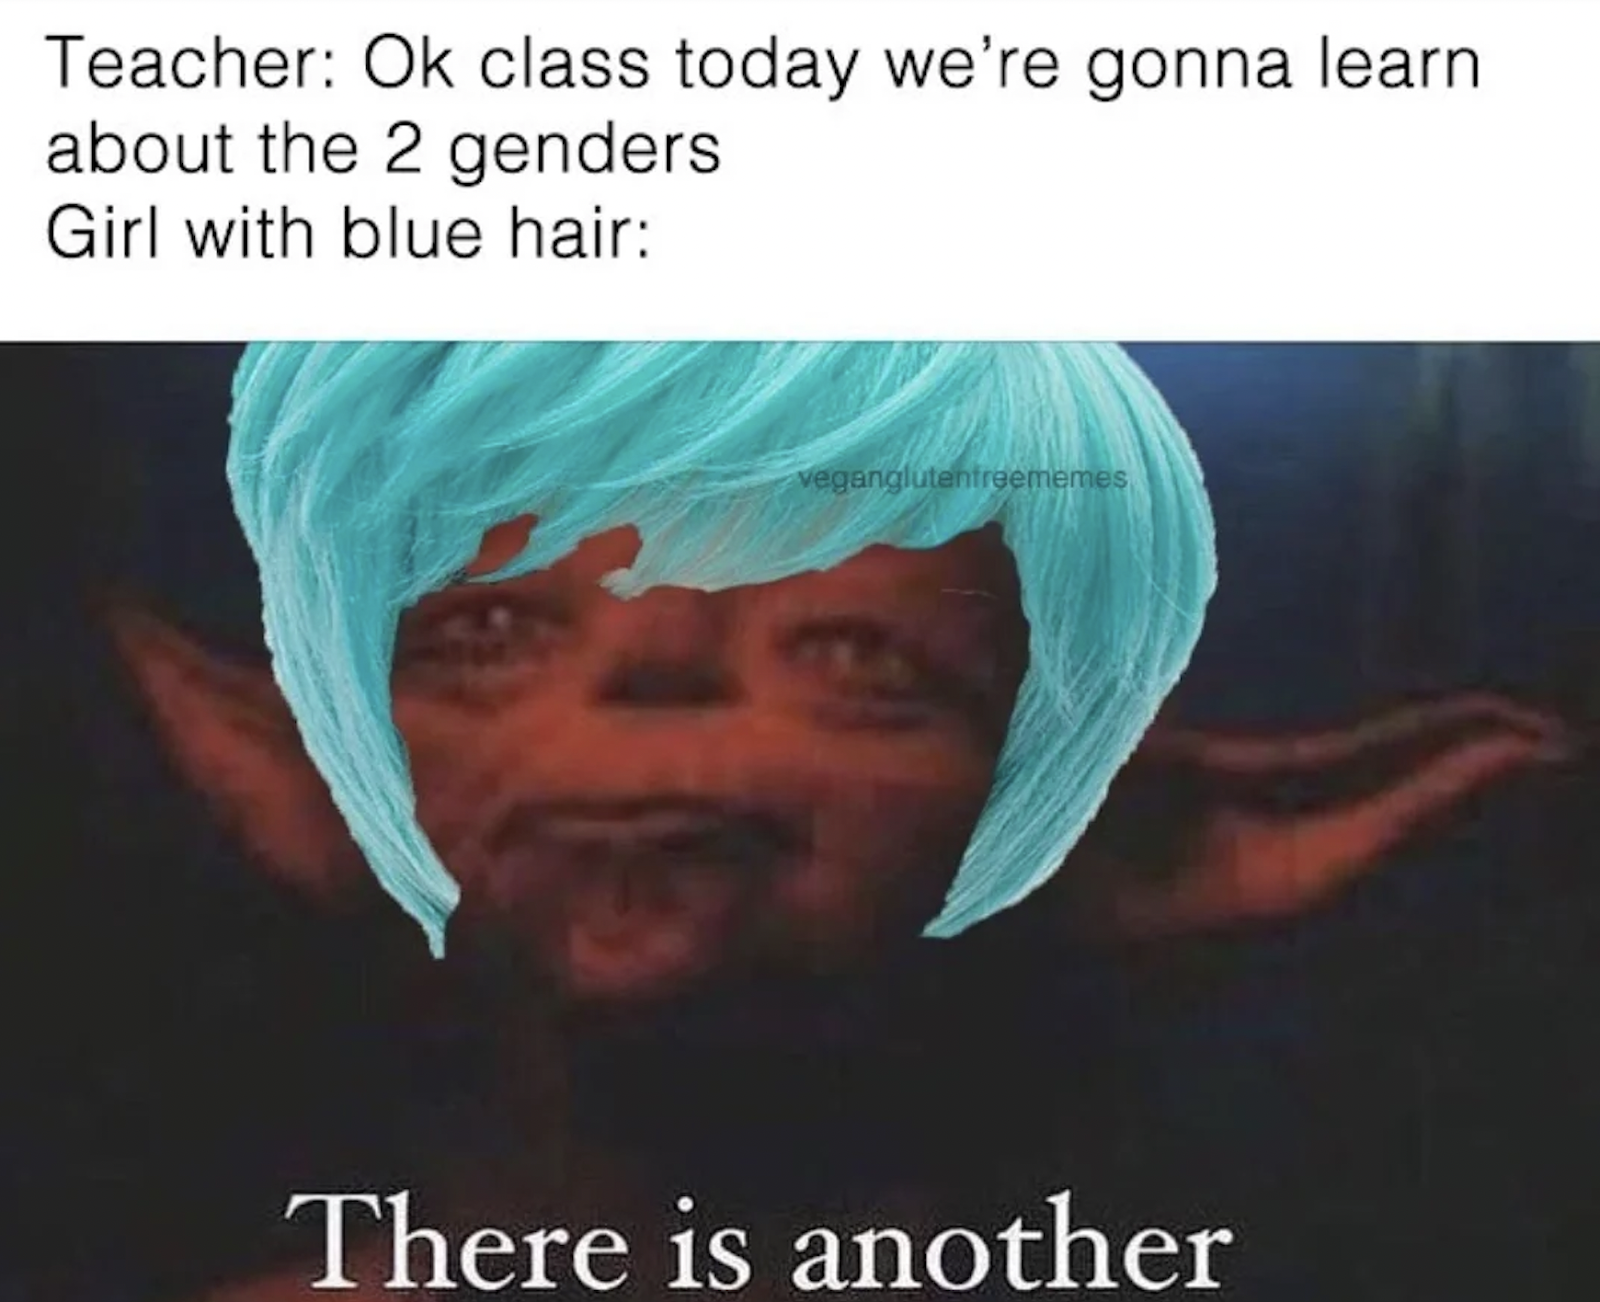 What did the blue-haired girl say when someone asked her about her hair color? - wide 3